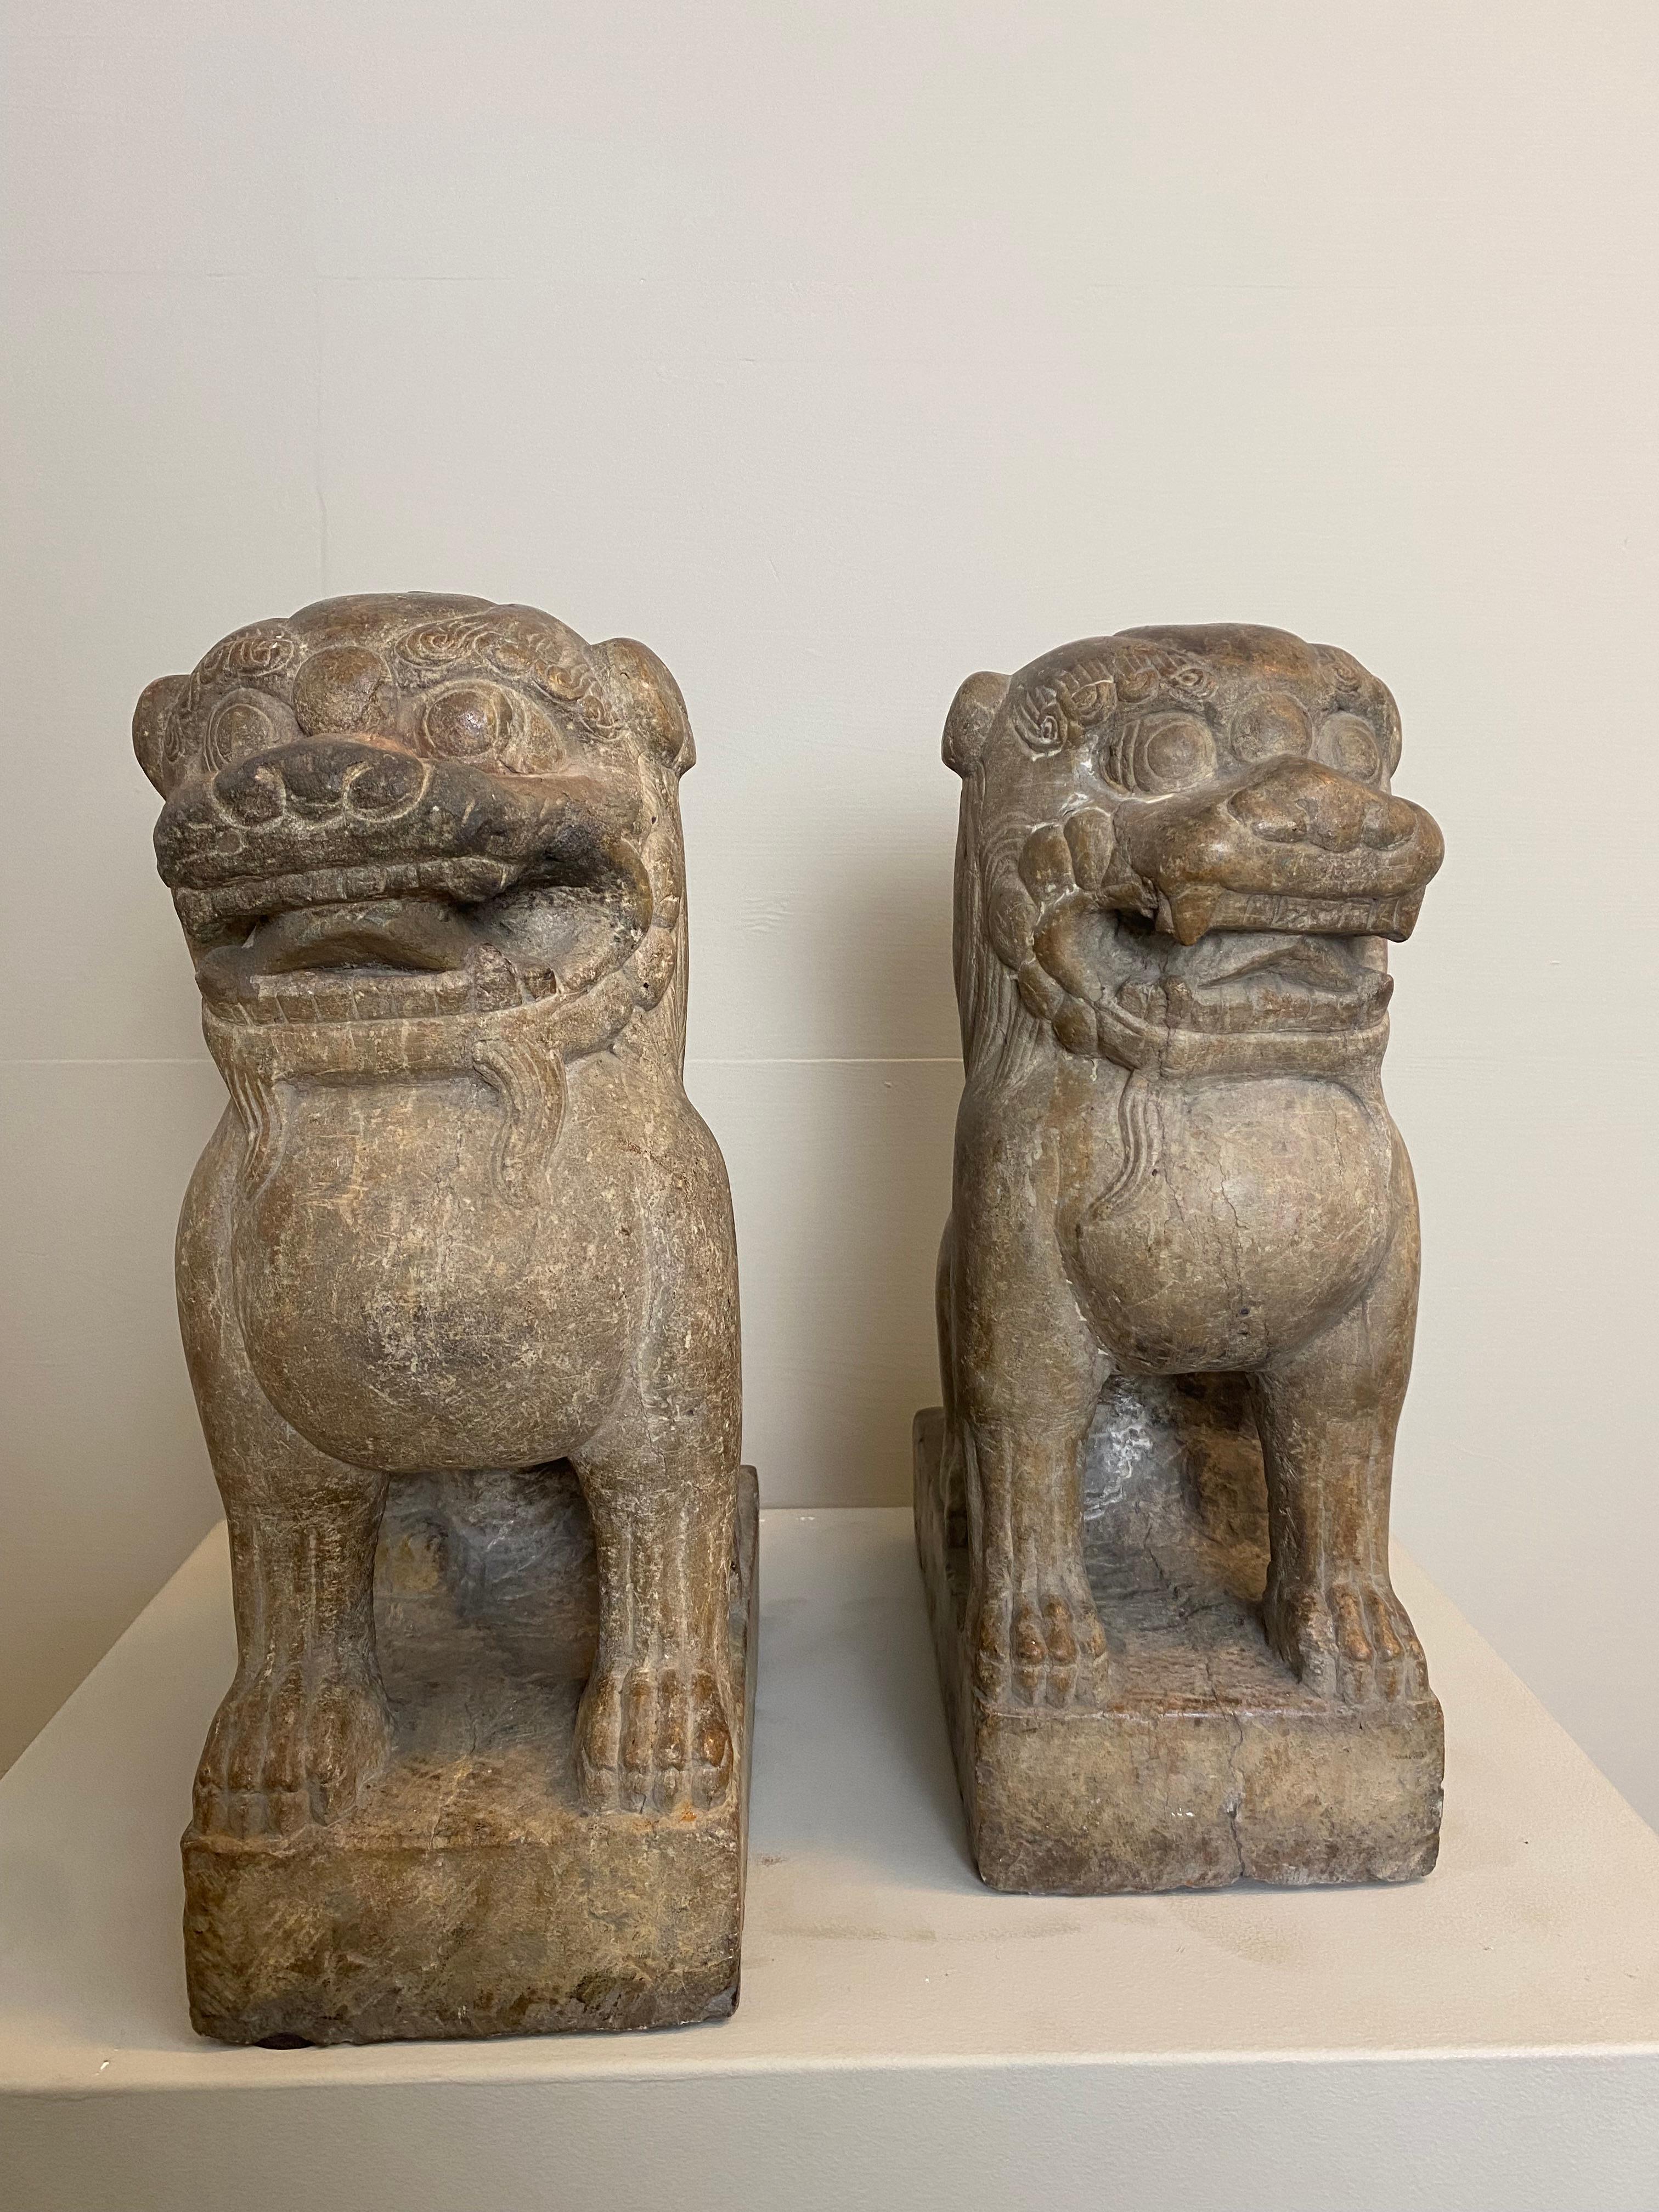 Exceptional Pair of Chinese Lions,Mythological Figures,
Good old great patina, and beautiful beige, brown color of the Marble,
Used to put at the Temple or House Entrance,
Ming Period.